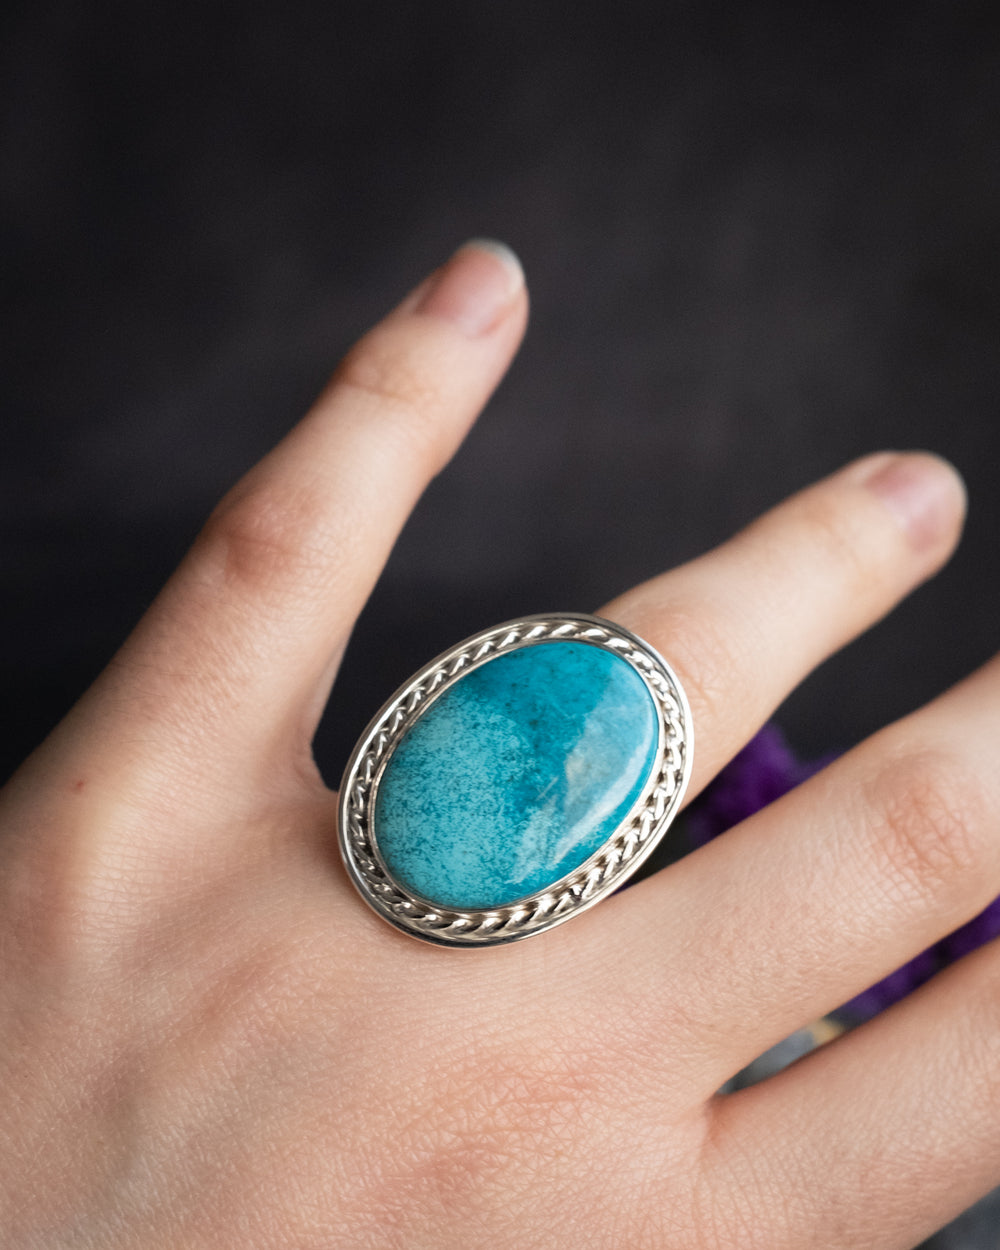 Namibian Chrysocolla Ring in Sterling Silver - Size 5 US / J 1/2 UK - The Healing Pear